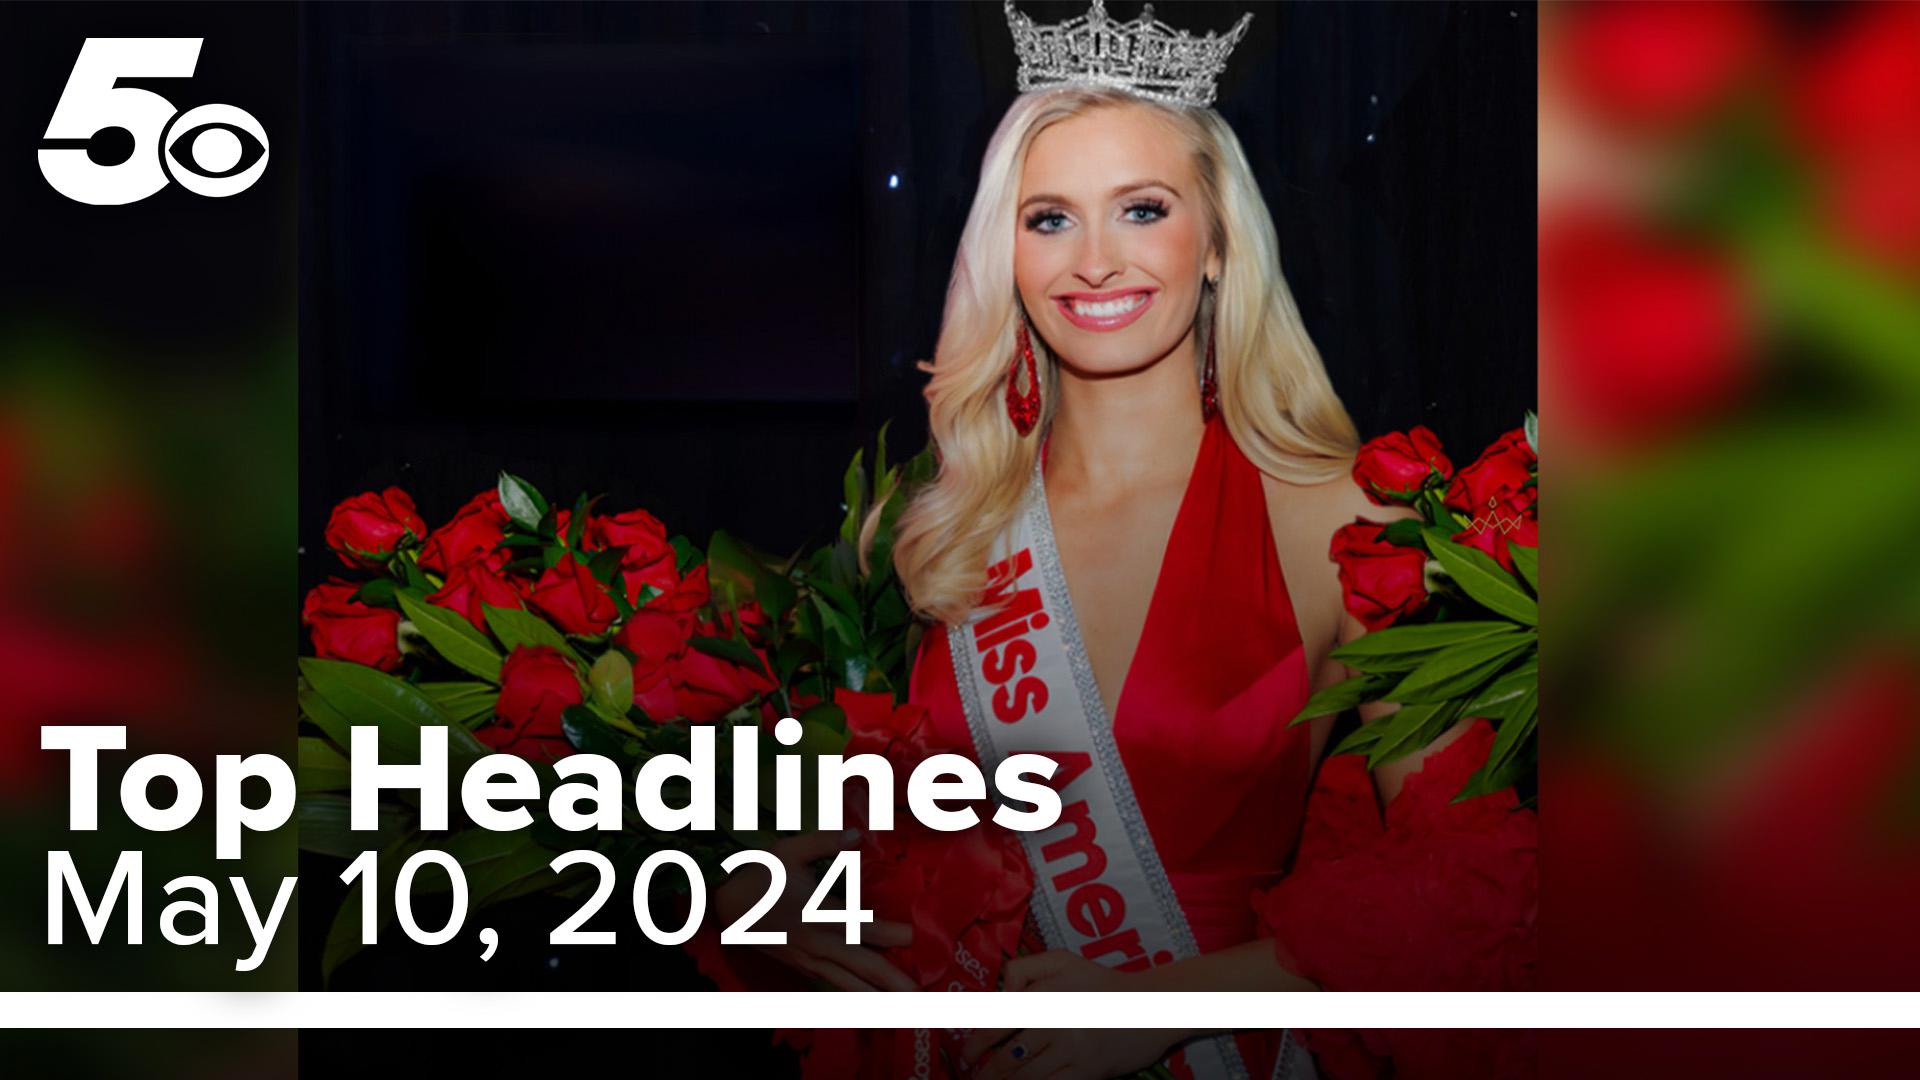 Fort Smith welcomes Miss America 2024 to her hometown. Check out this and more on 5NEWS Top Headlines.